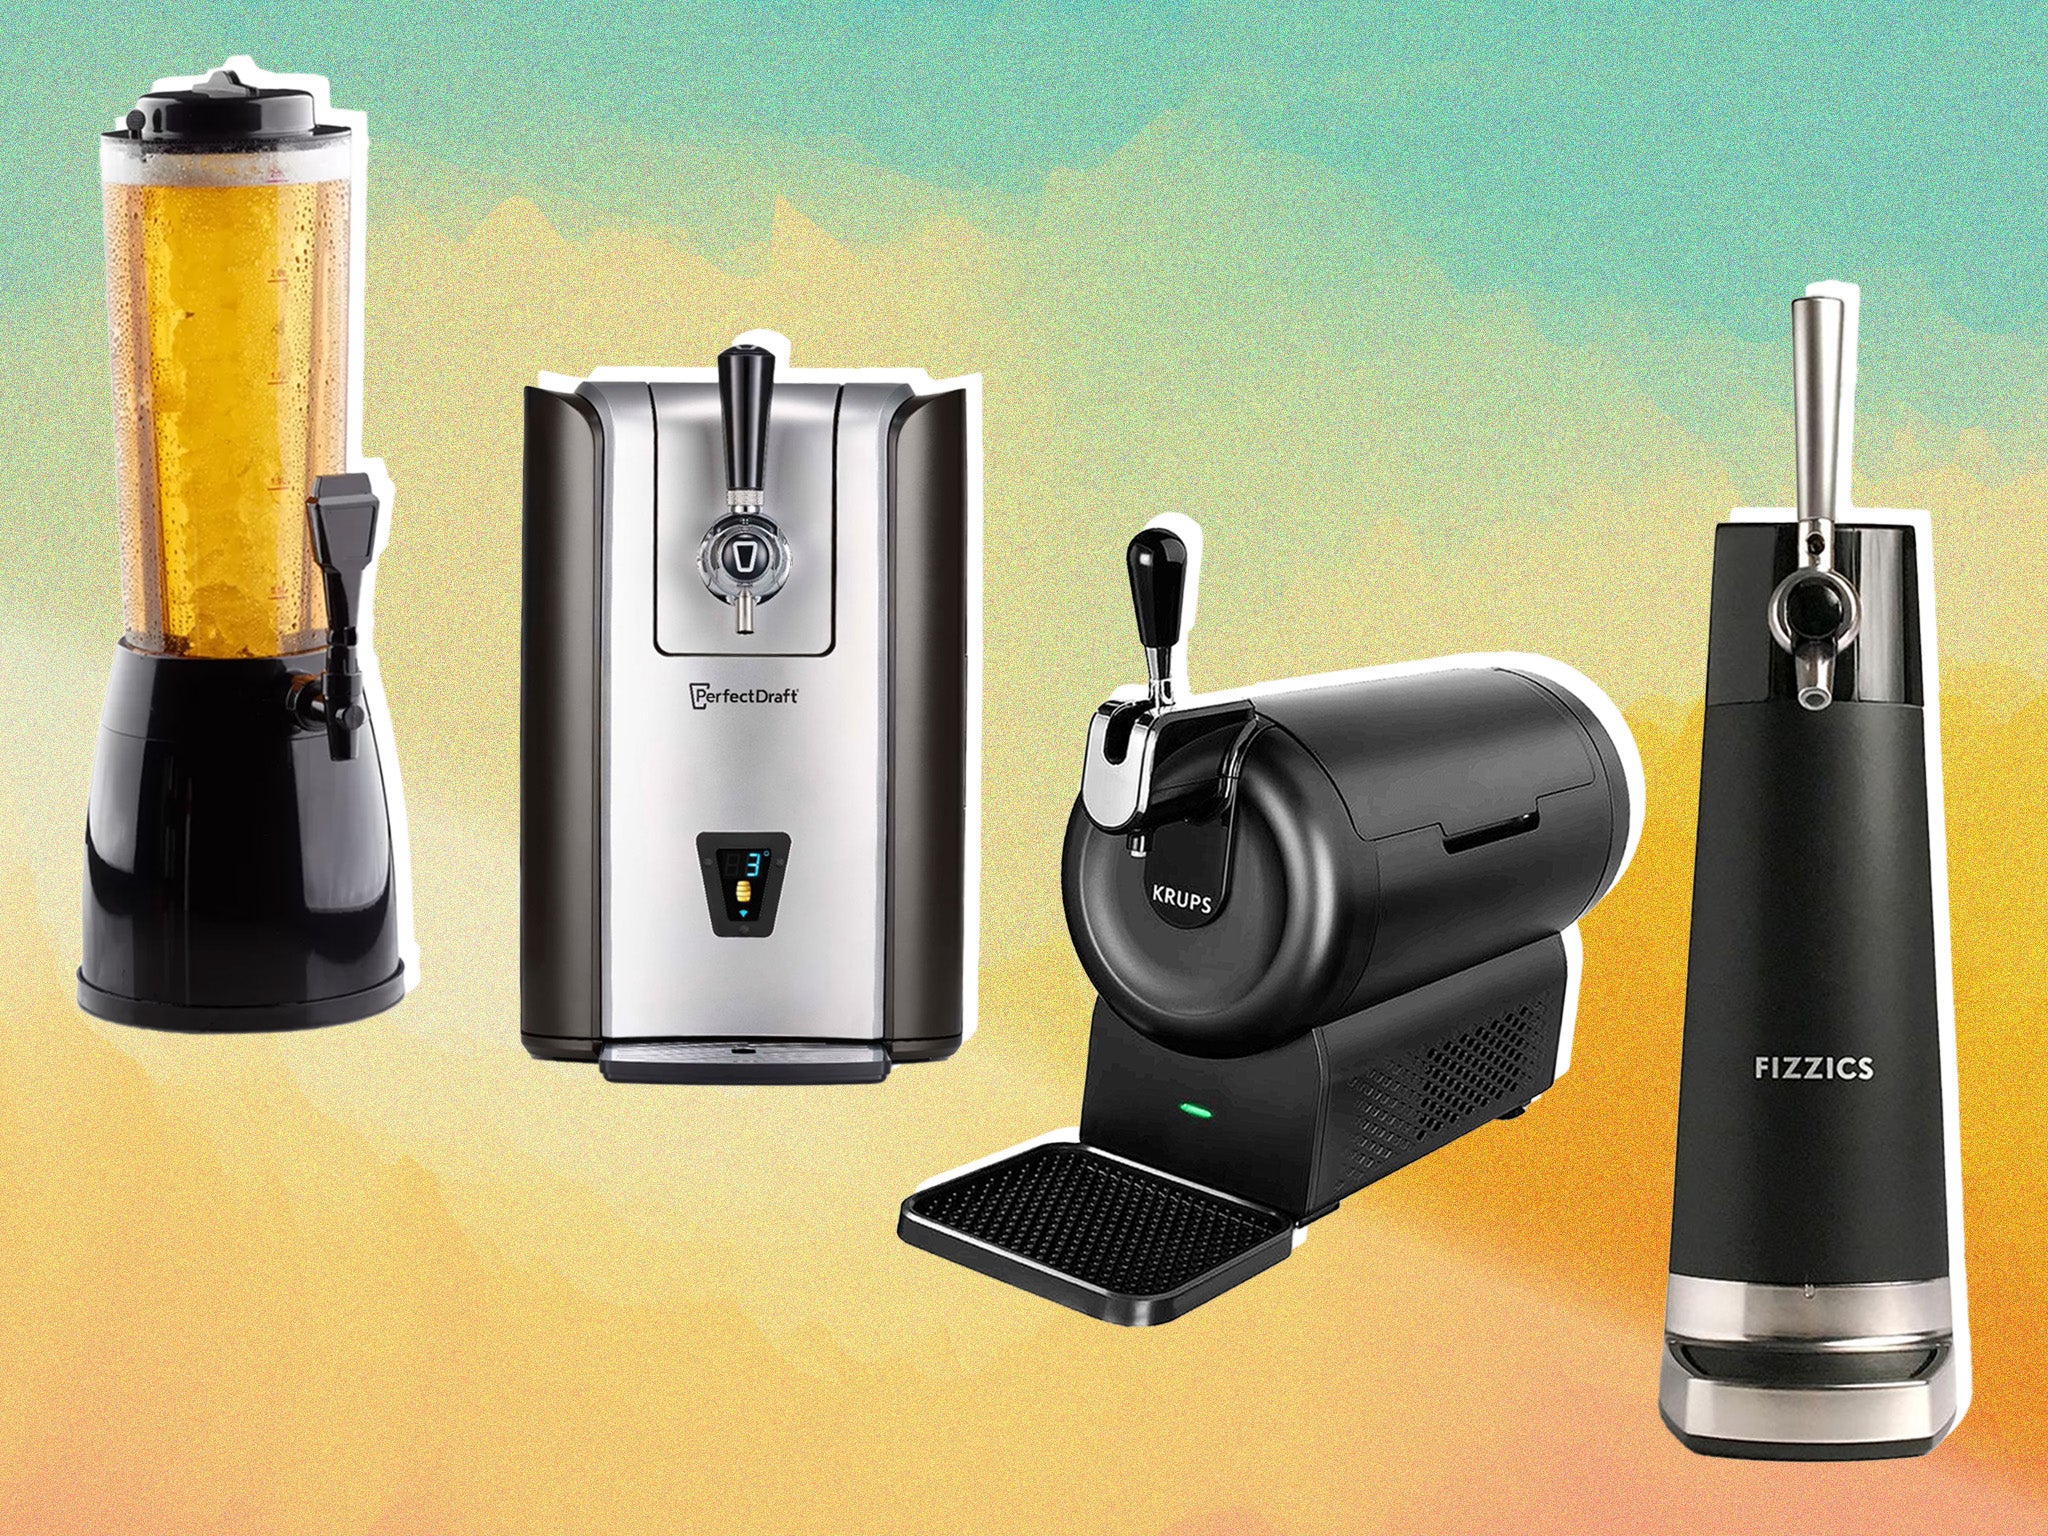 The Best Beverage Dispensers in 2022